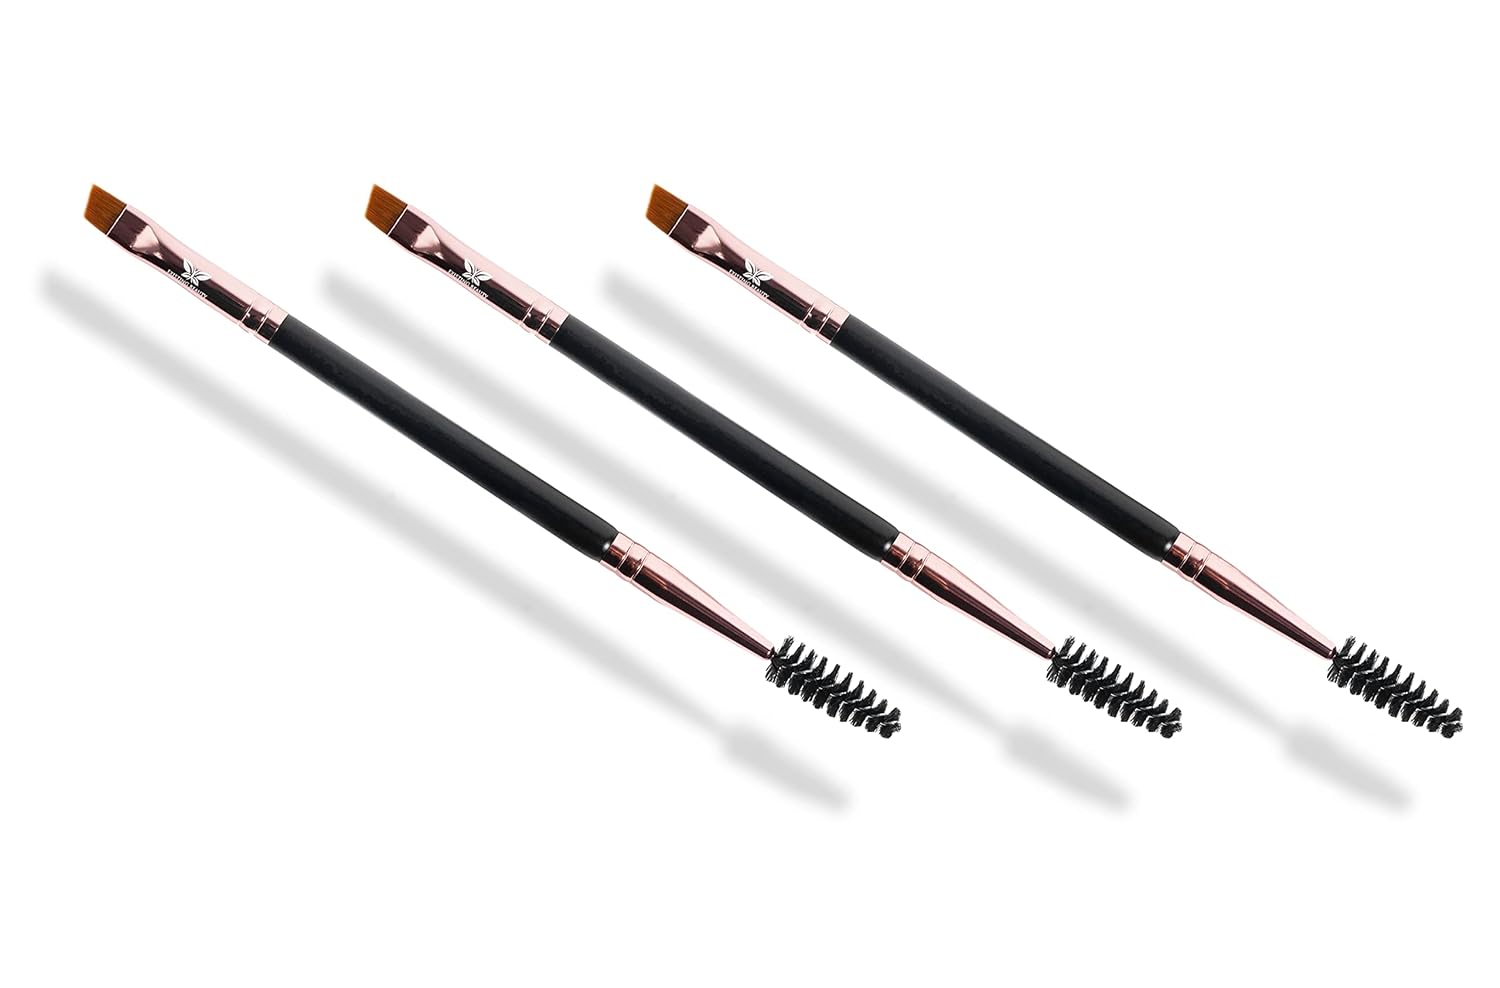 Henna Eyebrow Brush for Application of Eyebrow Henna Dual Sided Henna for Eyebrows Brush - Brow Brush for Henna Eyebrow - Double Sided Eye Brow Brush by Existing Beauty (3-Pack)